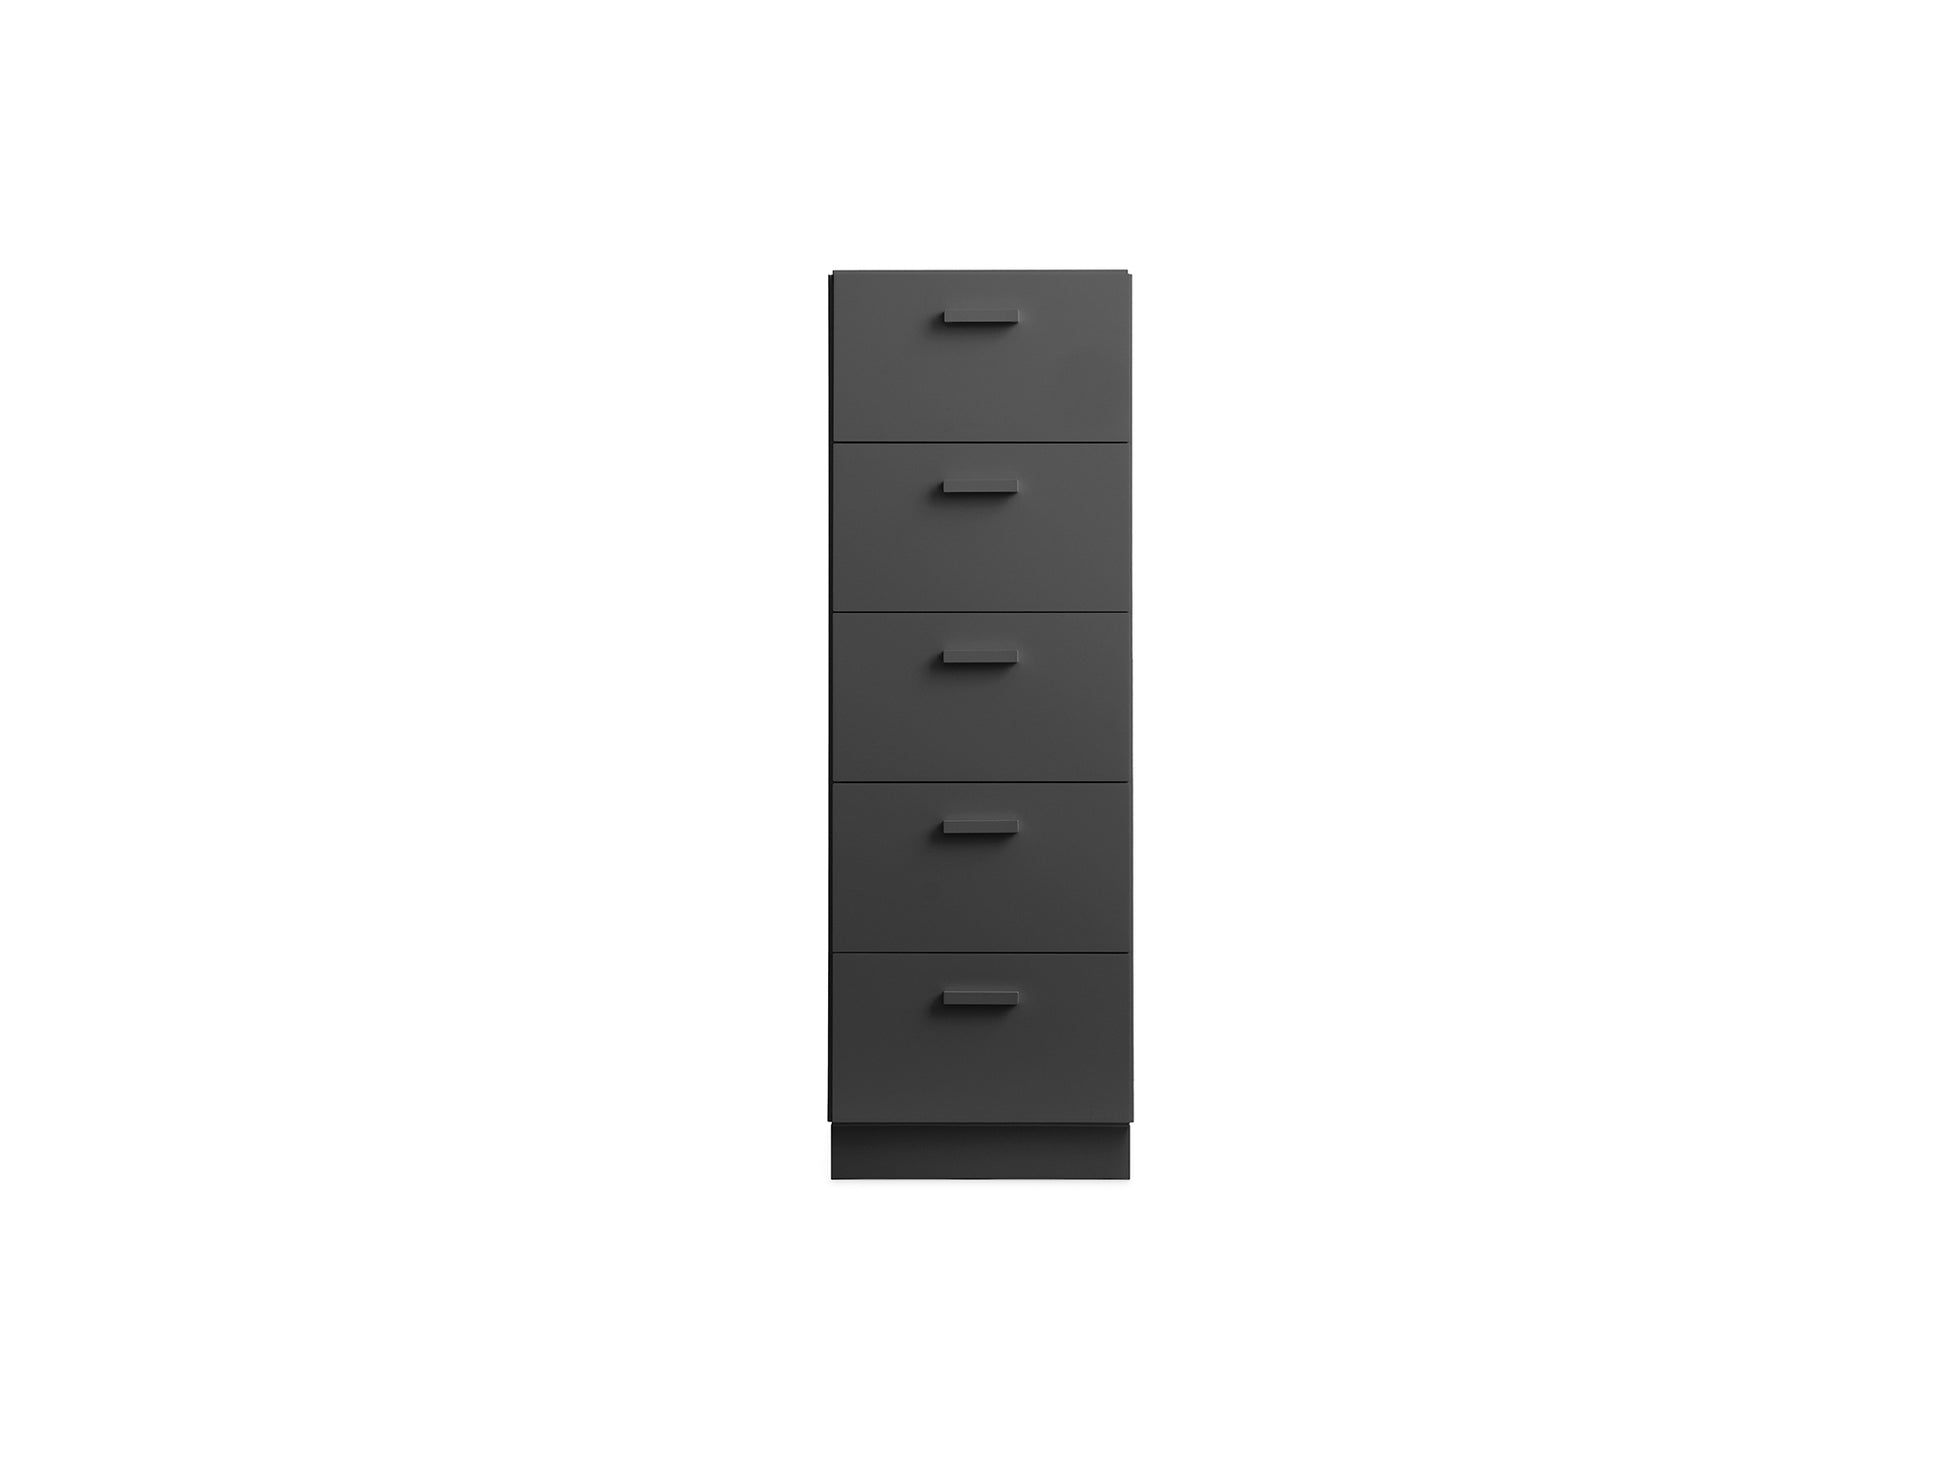 Relief Drawers with Plinth Base - Tall by String - Grey